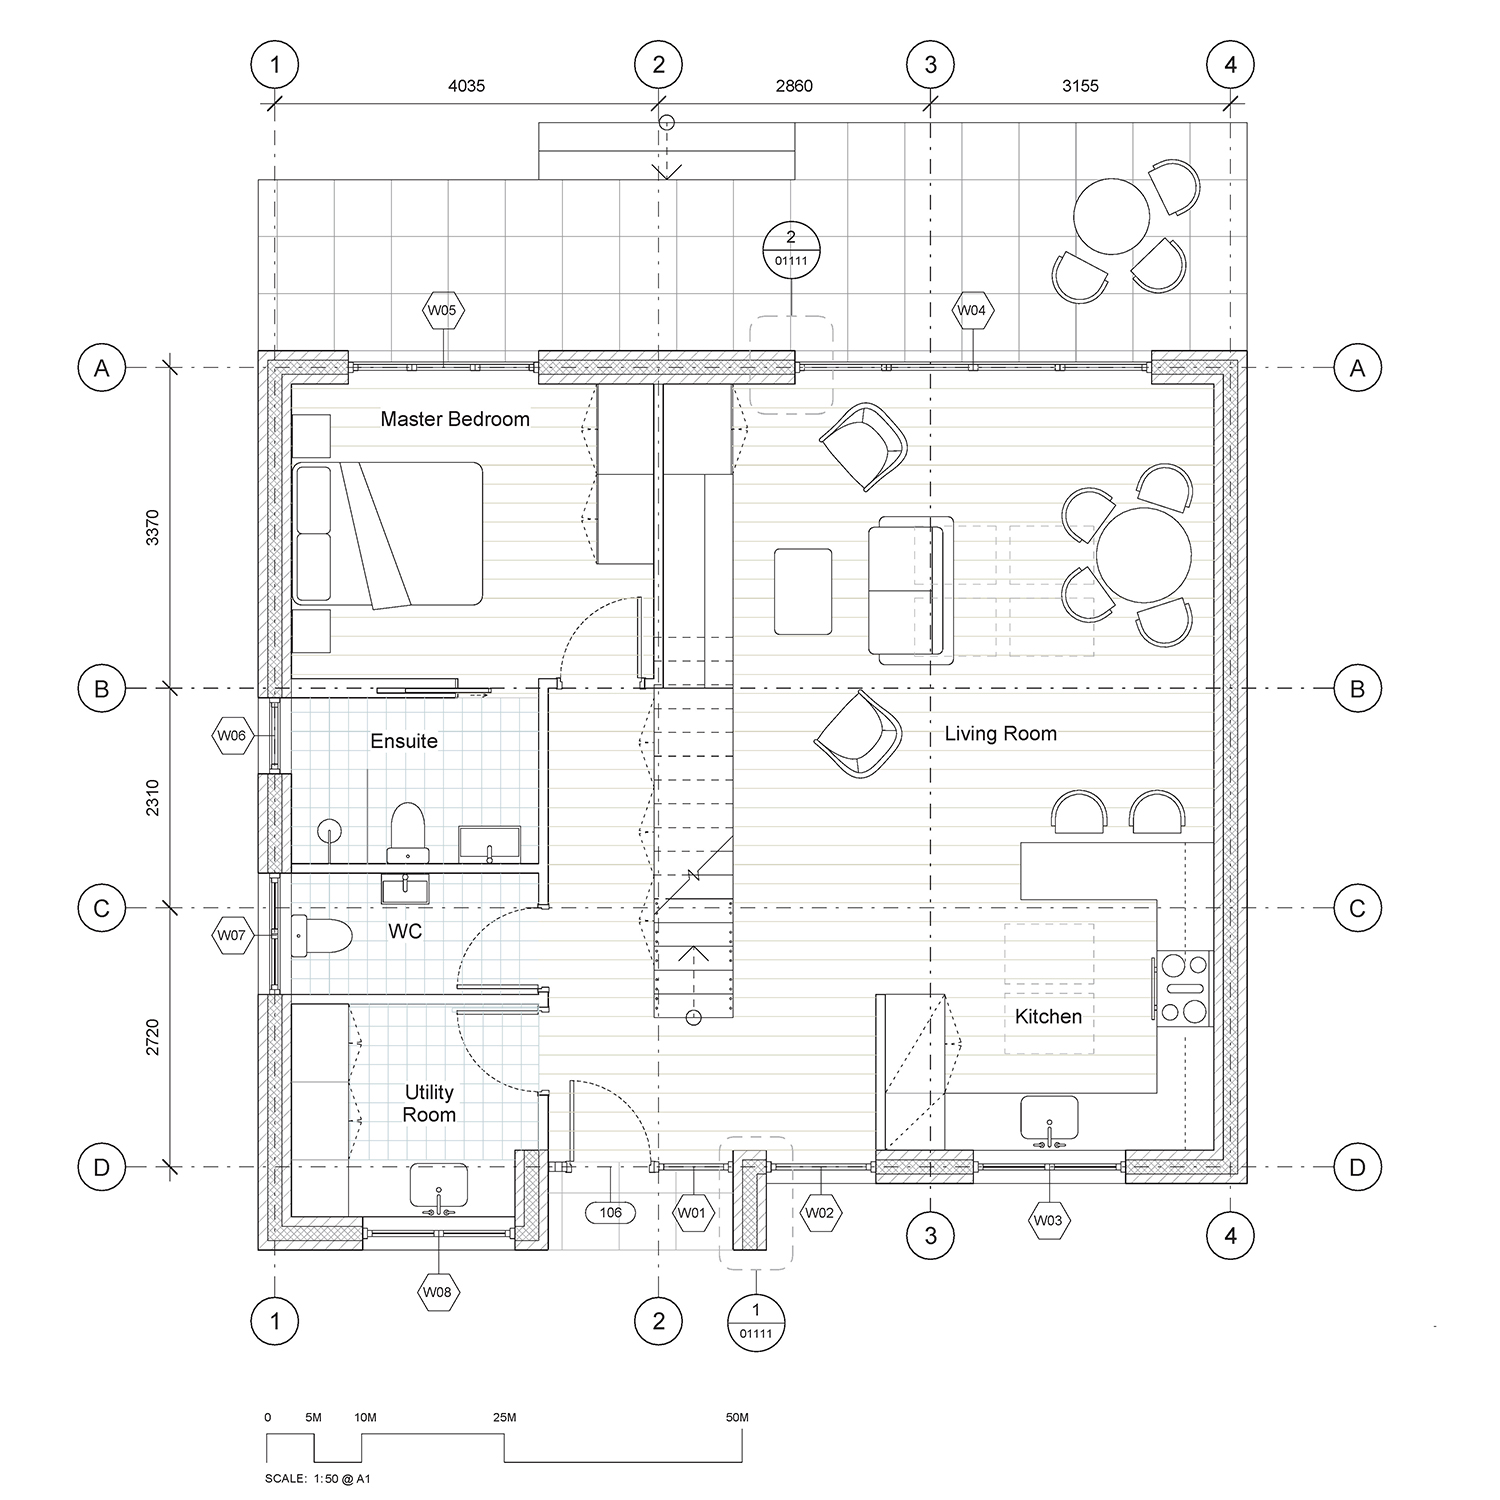 Plan showing Revit Template drawing with hatches